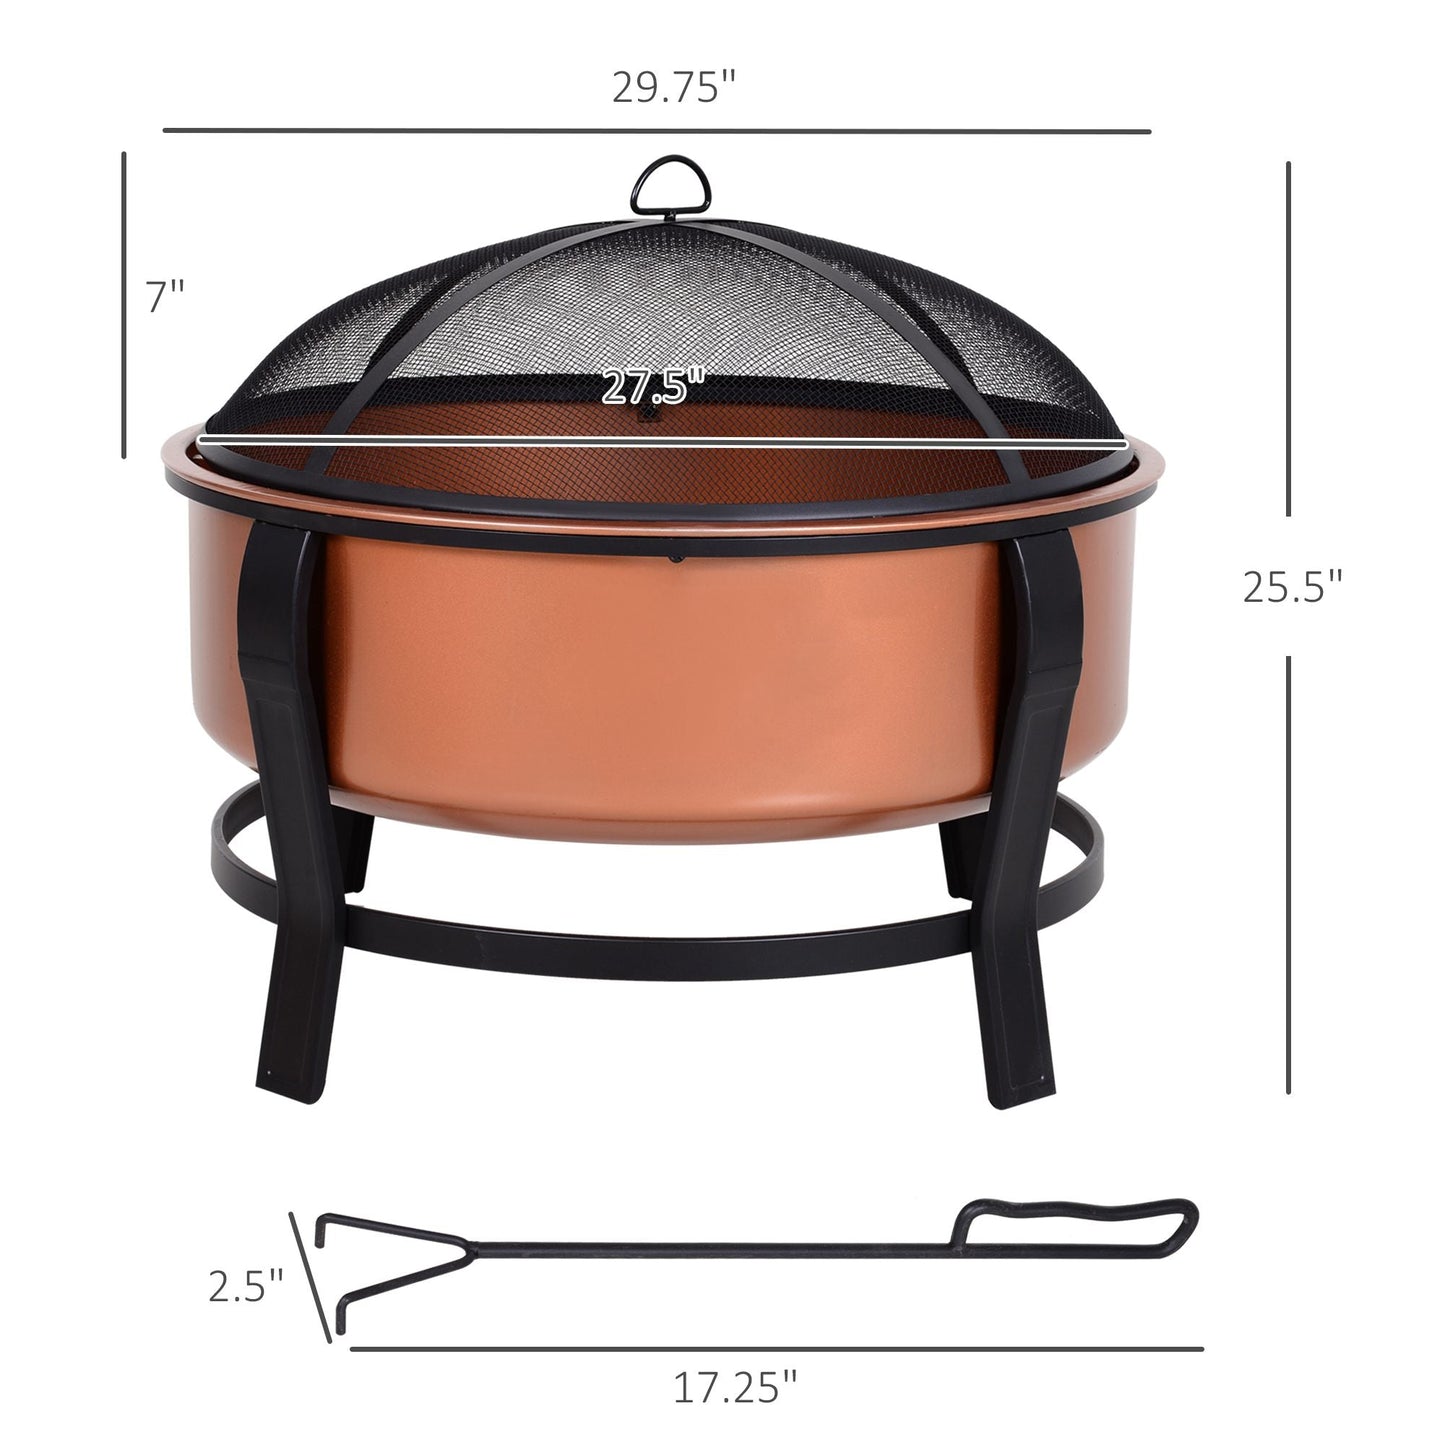 Outdoor and Garden-30 Inch Outdoor Fire Pit, Round Outdoor Wood Burning Fire Pit with Spark Screen for Embers - Outdoor Style Company